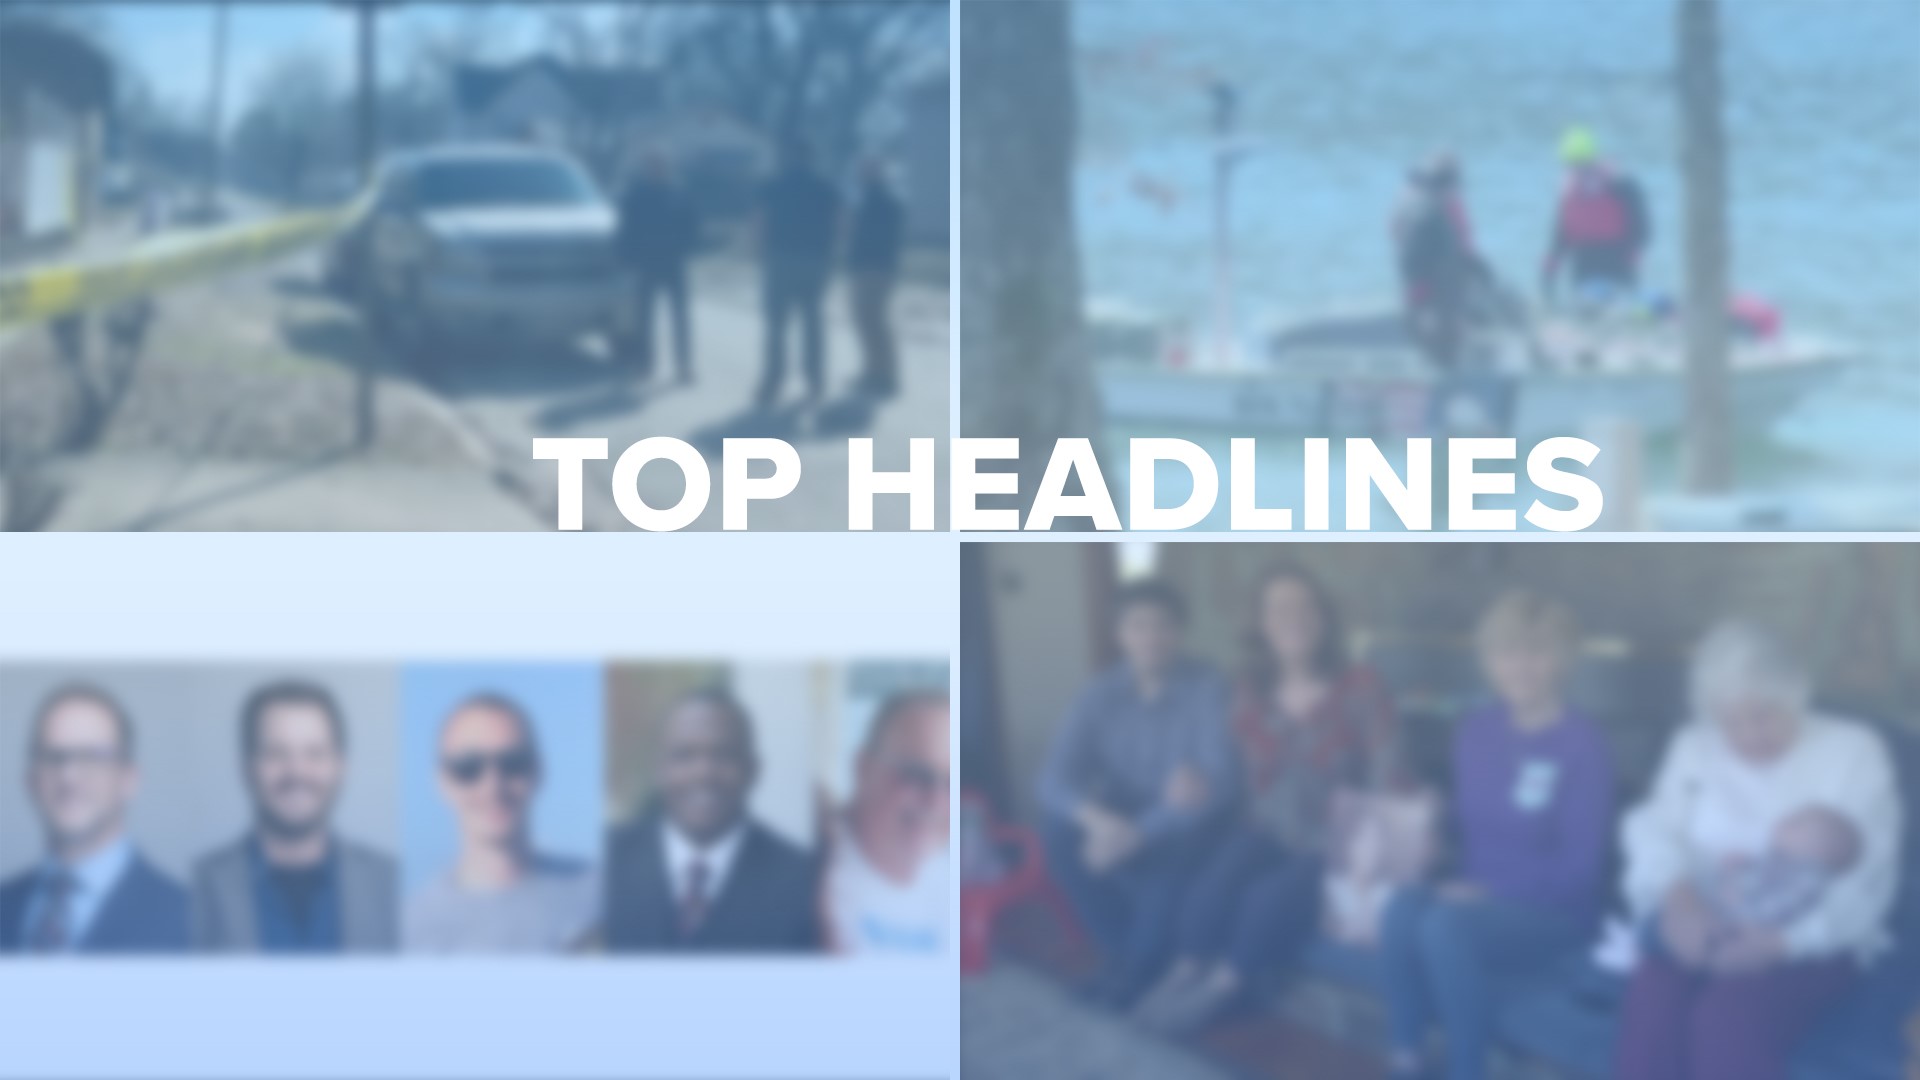 Check out today's top headlines for local news across the area! 📰